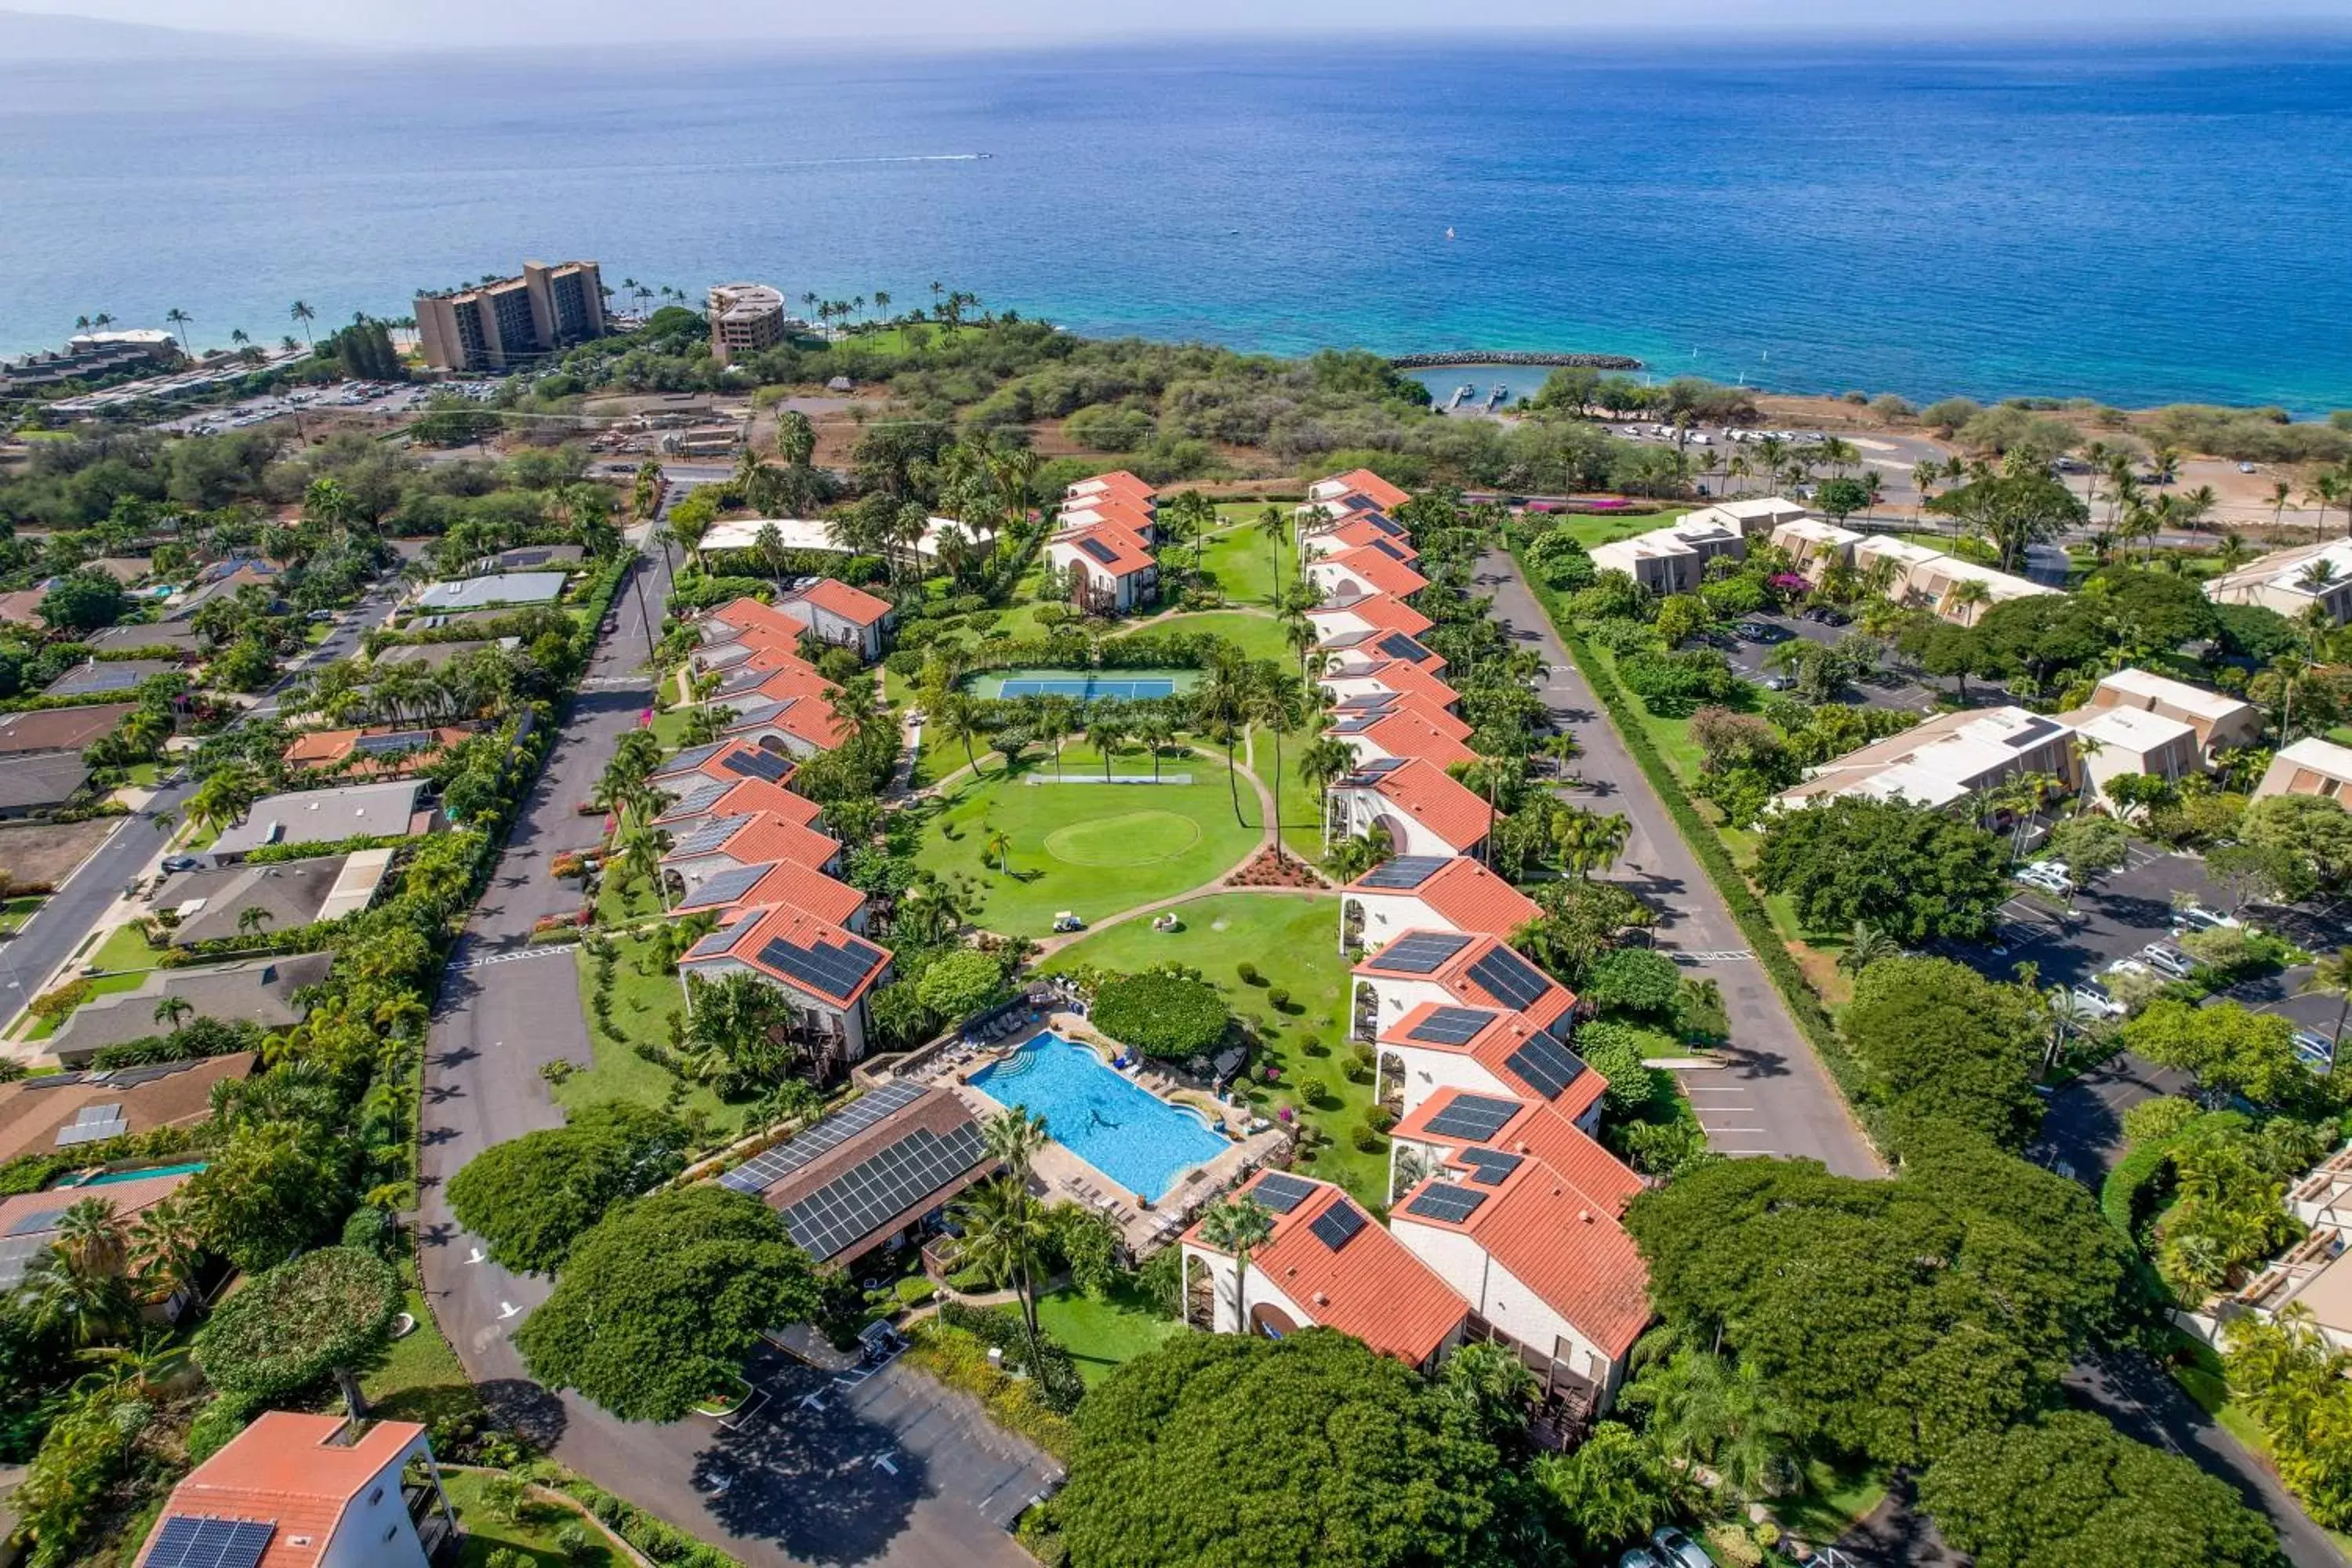 Property building, Bird's-eye View in Aston Maui Hill